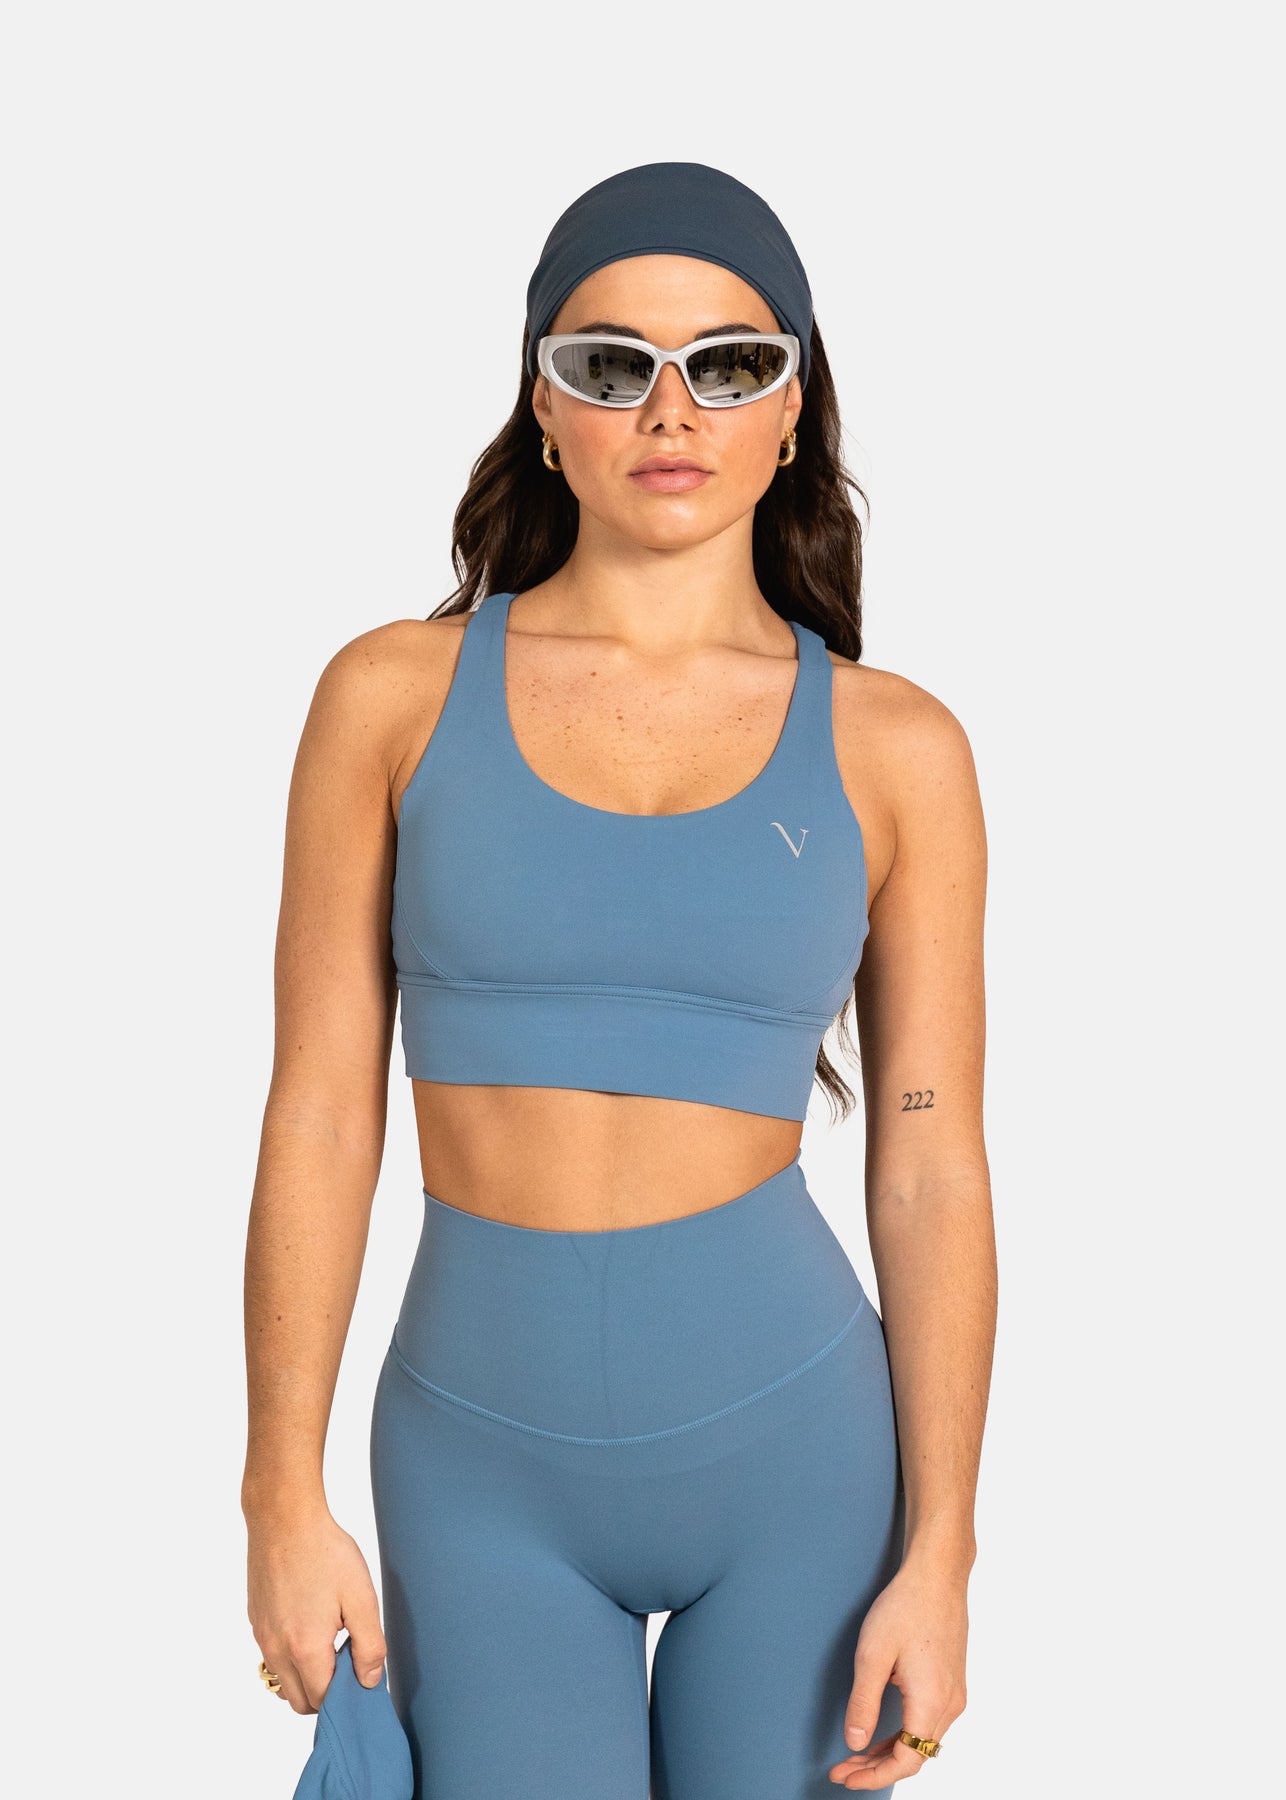 Women's Athletic Tops - Sports Bras, Jackets, Hoodies, Shirts & Tanks –  Tagged blue – Vitality Athletic Apparel